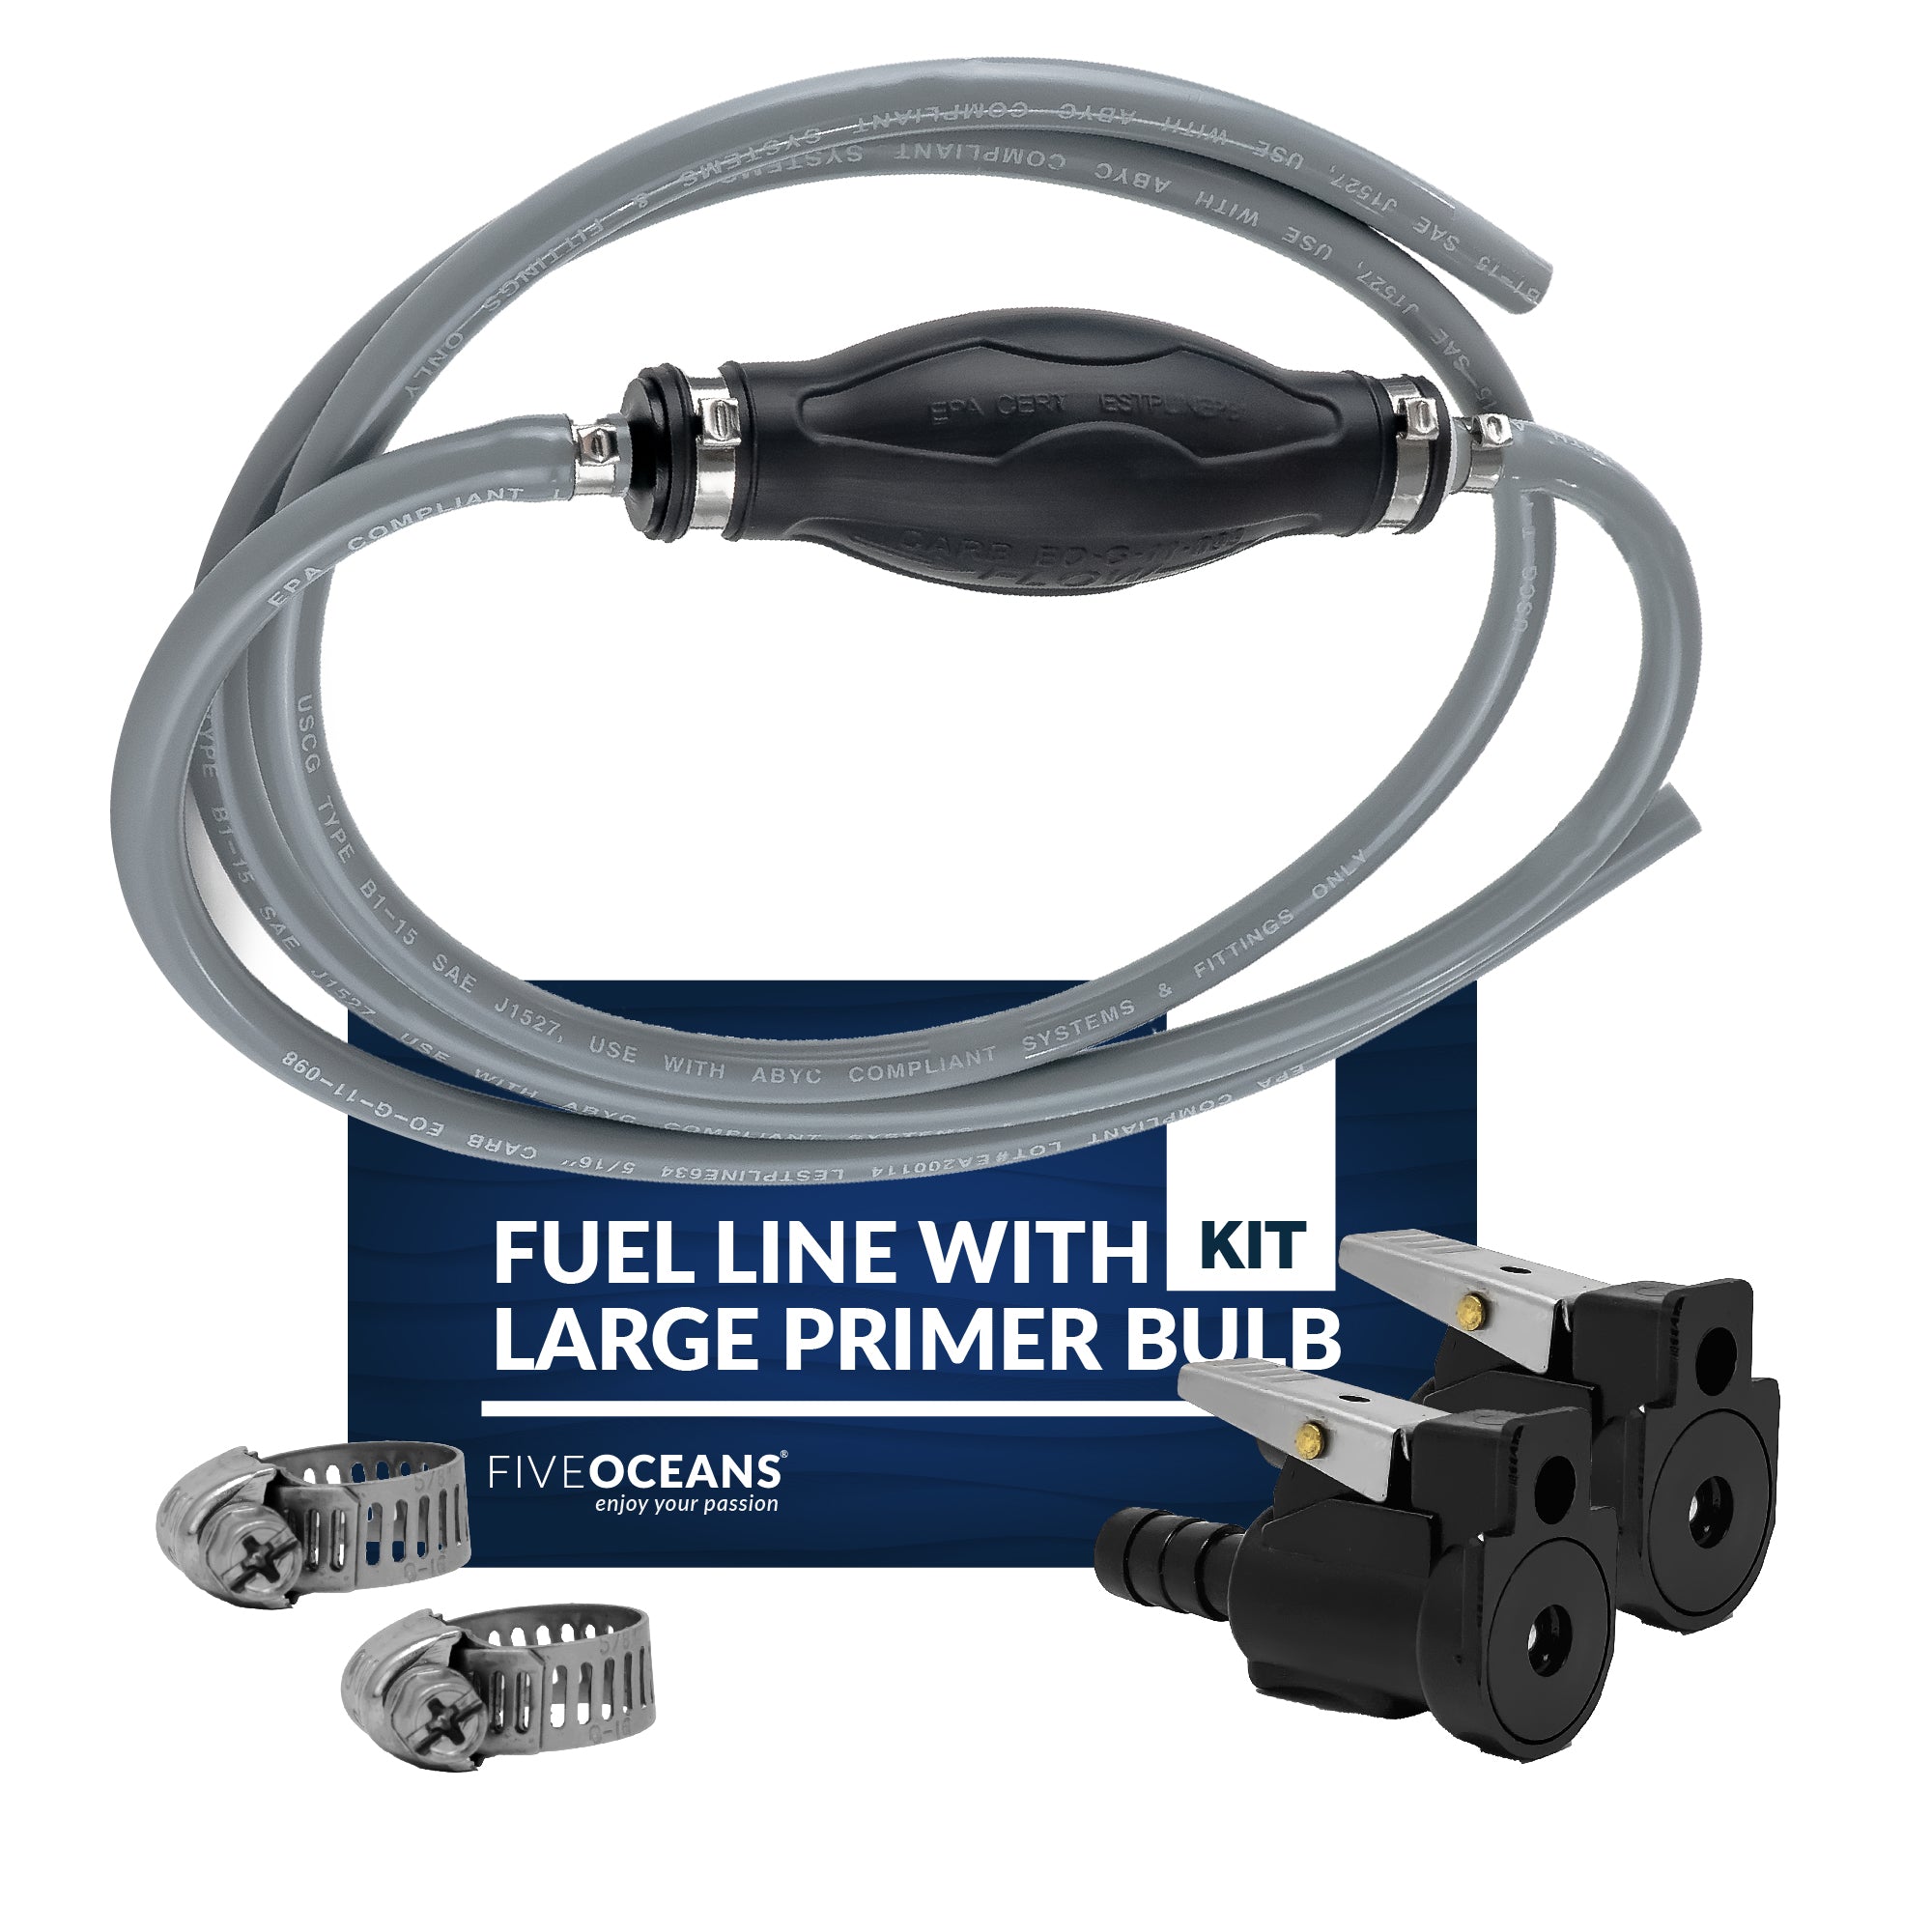 Fuel Line with Large Primer Bulb for OMC/Johnson/Evinrude, 5/16" Hose, EPA/CARB - FO3100-C1